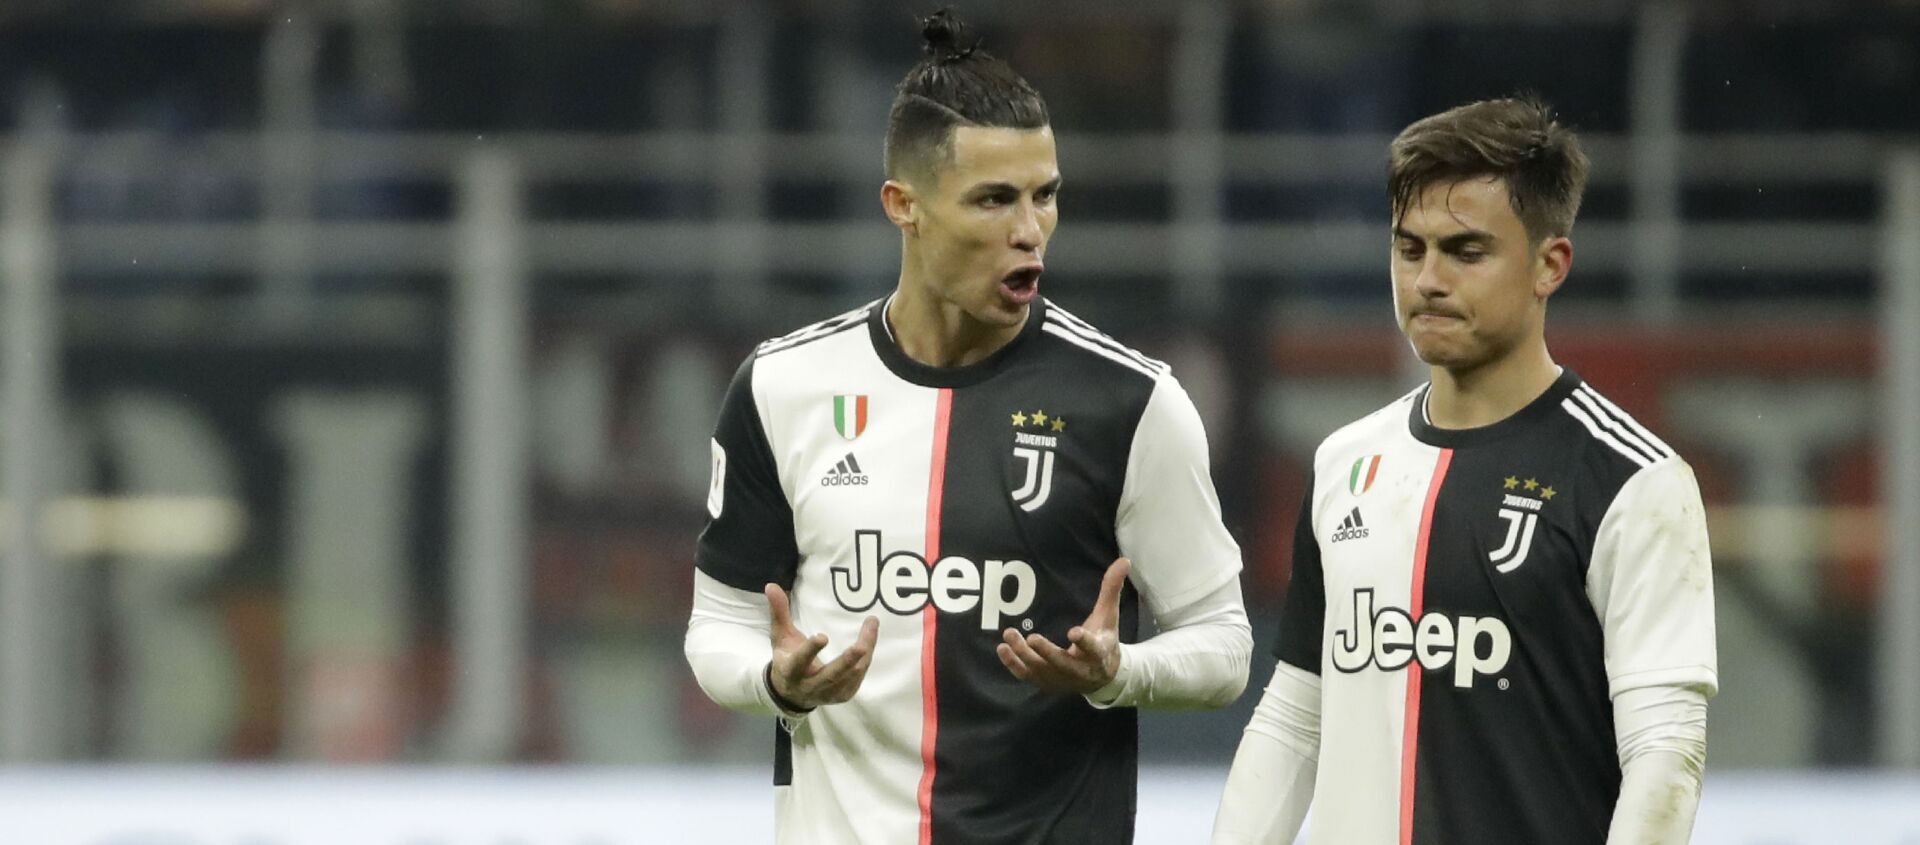 Juventus' Cristiano Ronaldo, left, speaks with Juventus' Paulo Dybala at the end of the Italian Cup soccer match between AC Milan and Juventus at the San Siro stadium, in Milan, Italy, Thursday, 13 February 2020 - Sputnik International, 1920, 15.04.2021